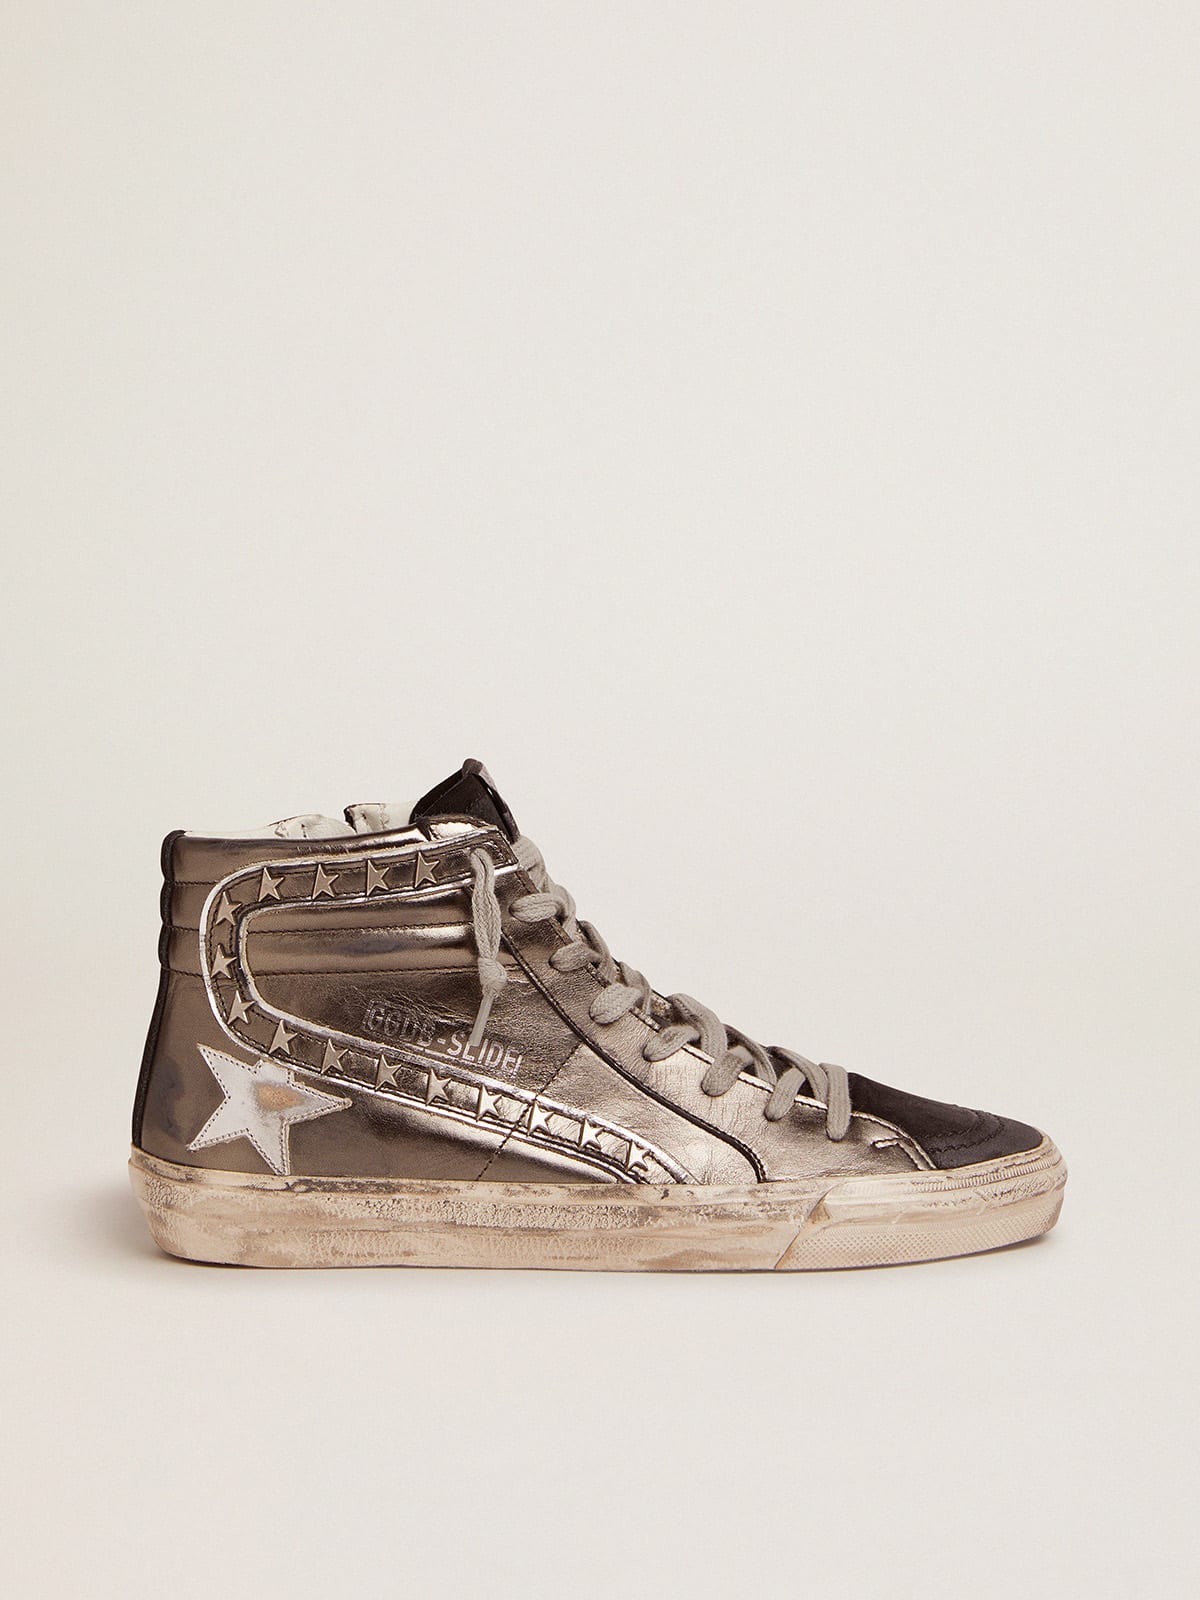 Golden Goose - Slide sneakers with silver laminated leather upper and star-shaped studs in 